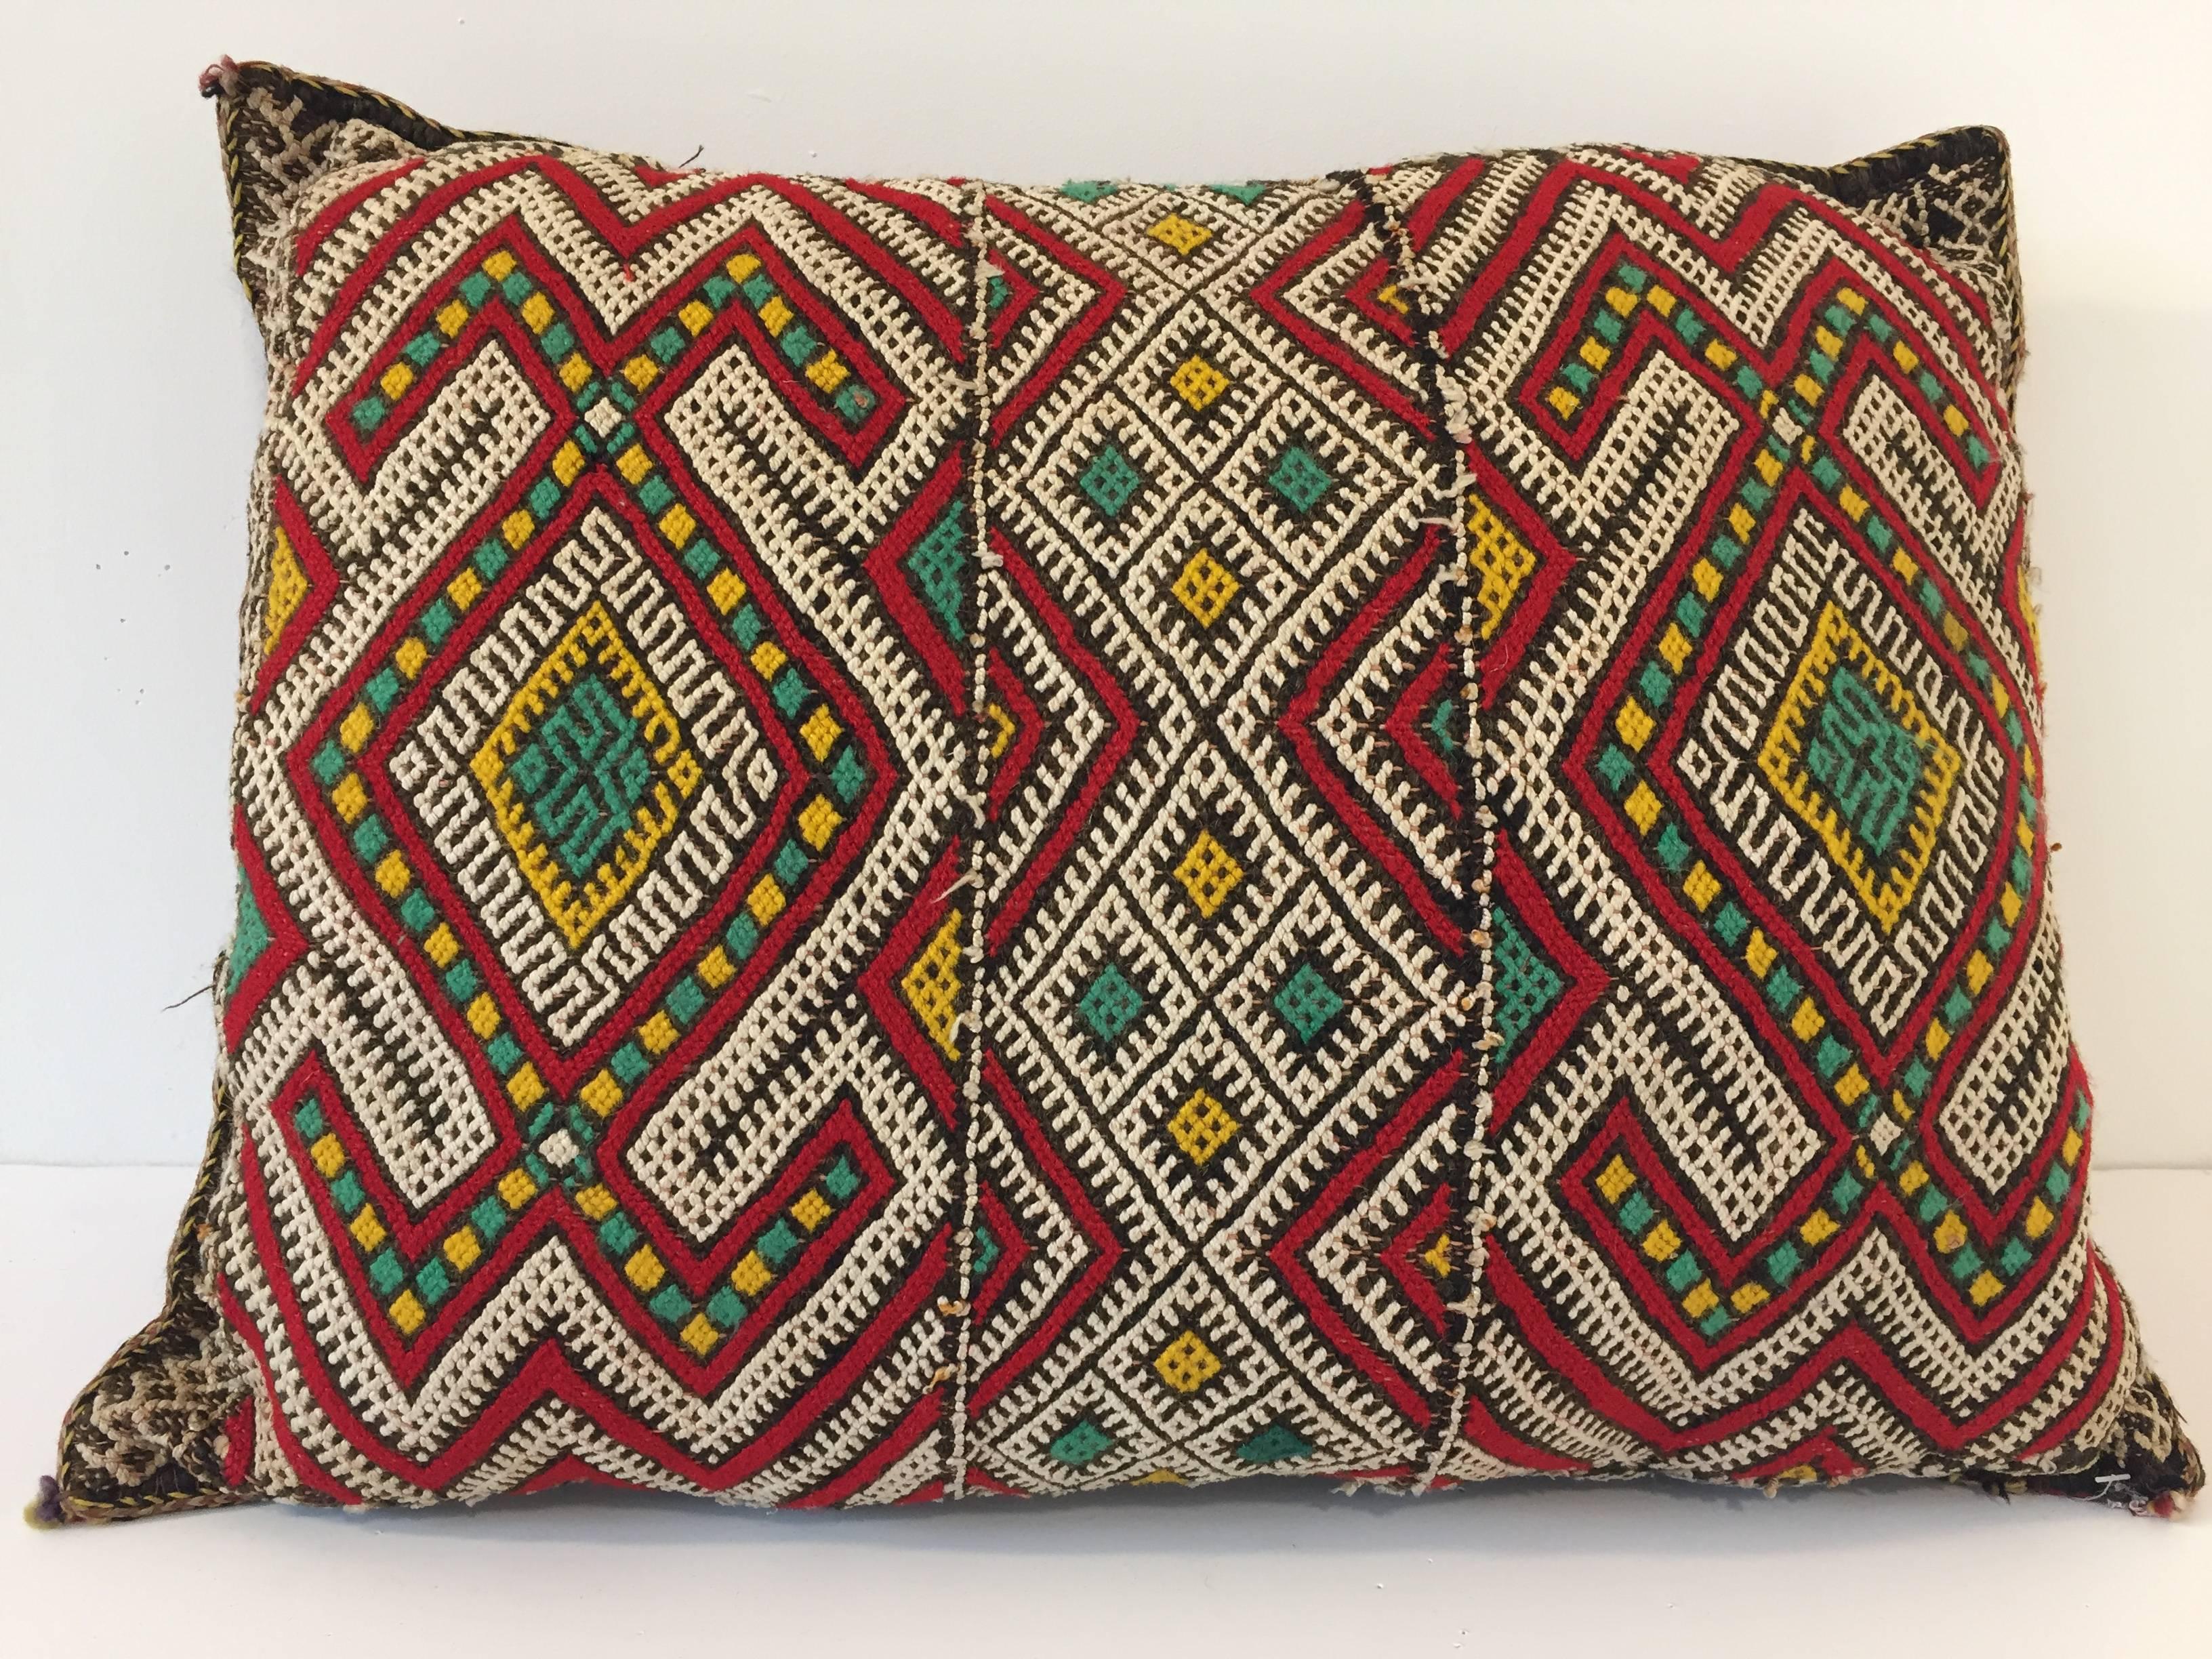 Moroccan Berber pillow red with geometric tribal designs.
Handwoven tribal throw pillow made from a vintage flat-weave rug. 
The front and the back are made from a different rug, front is more elaborate and back is red with stripes. 
Handwoven by